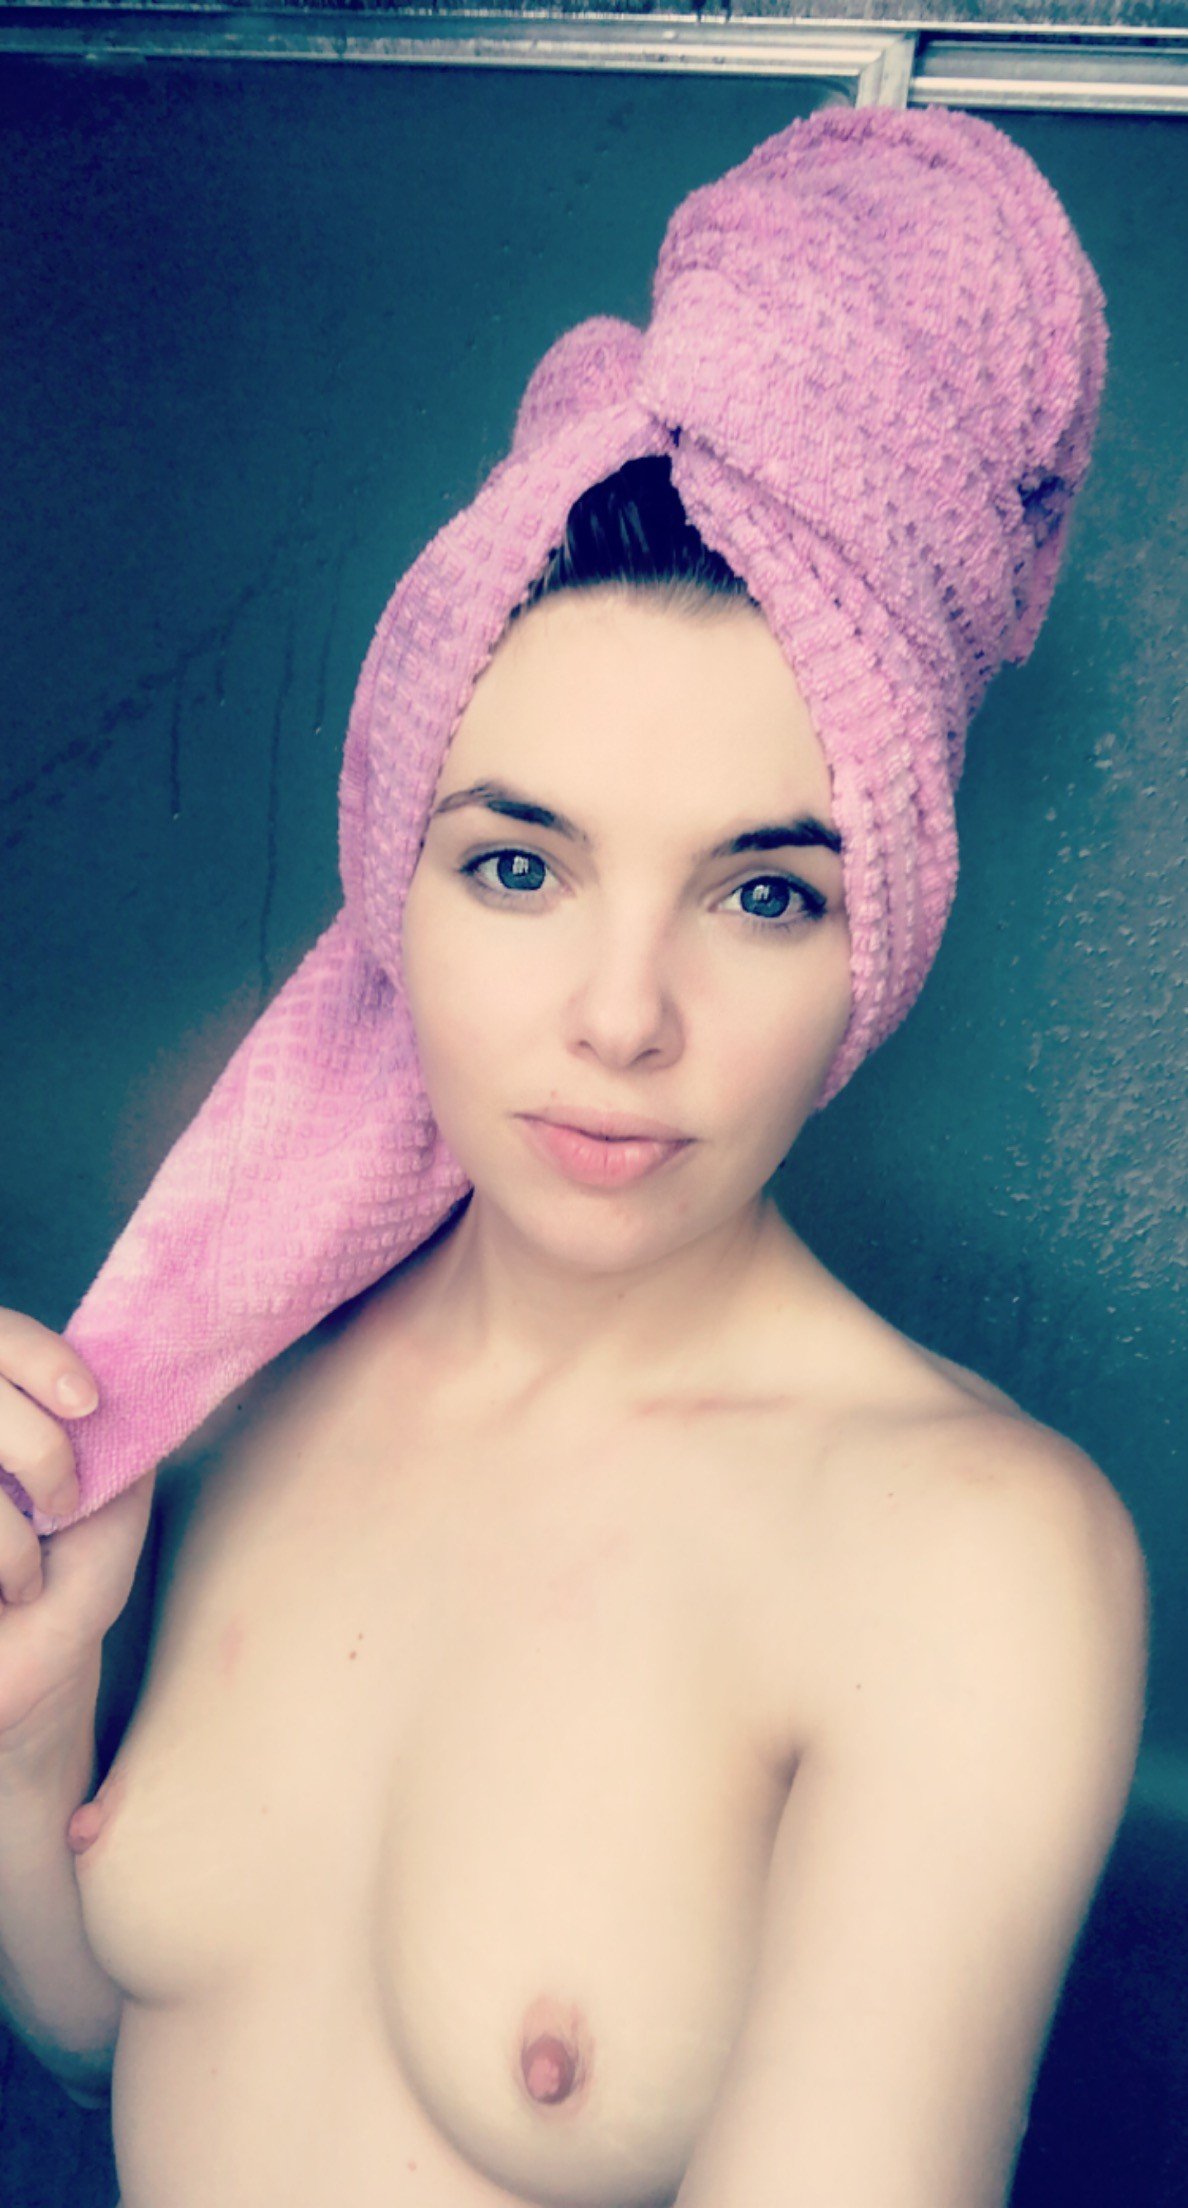 Watch the Photo by MagnoliaJames with the username @MagnoliaJames, who is a star user, posted on December 5, 2020 and the text says 'Happy Saturday!! #Shower #Smalltitties'